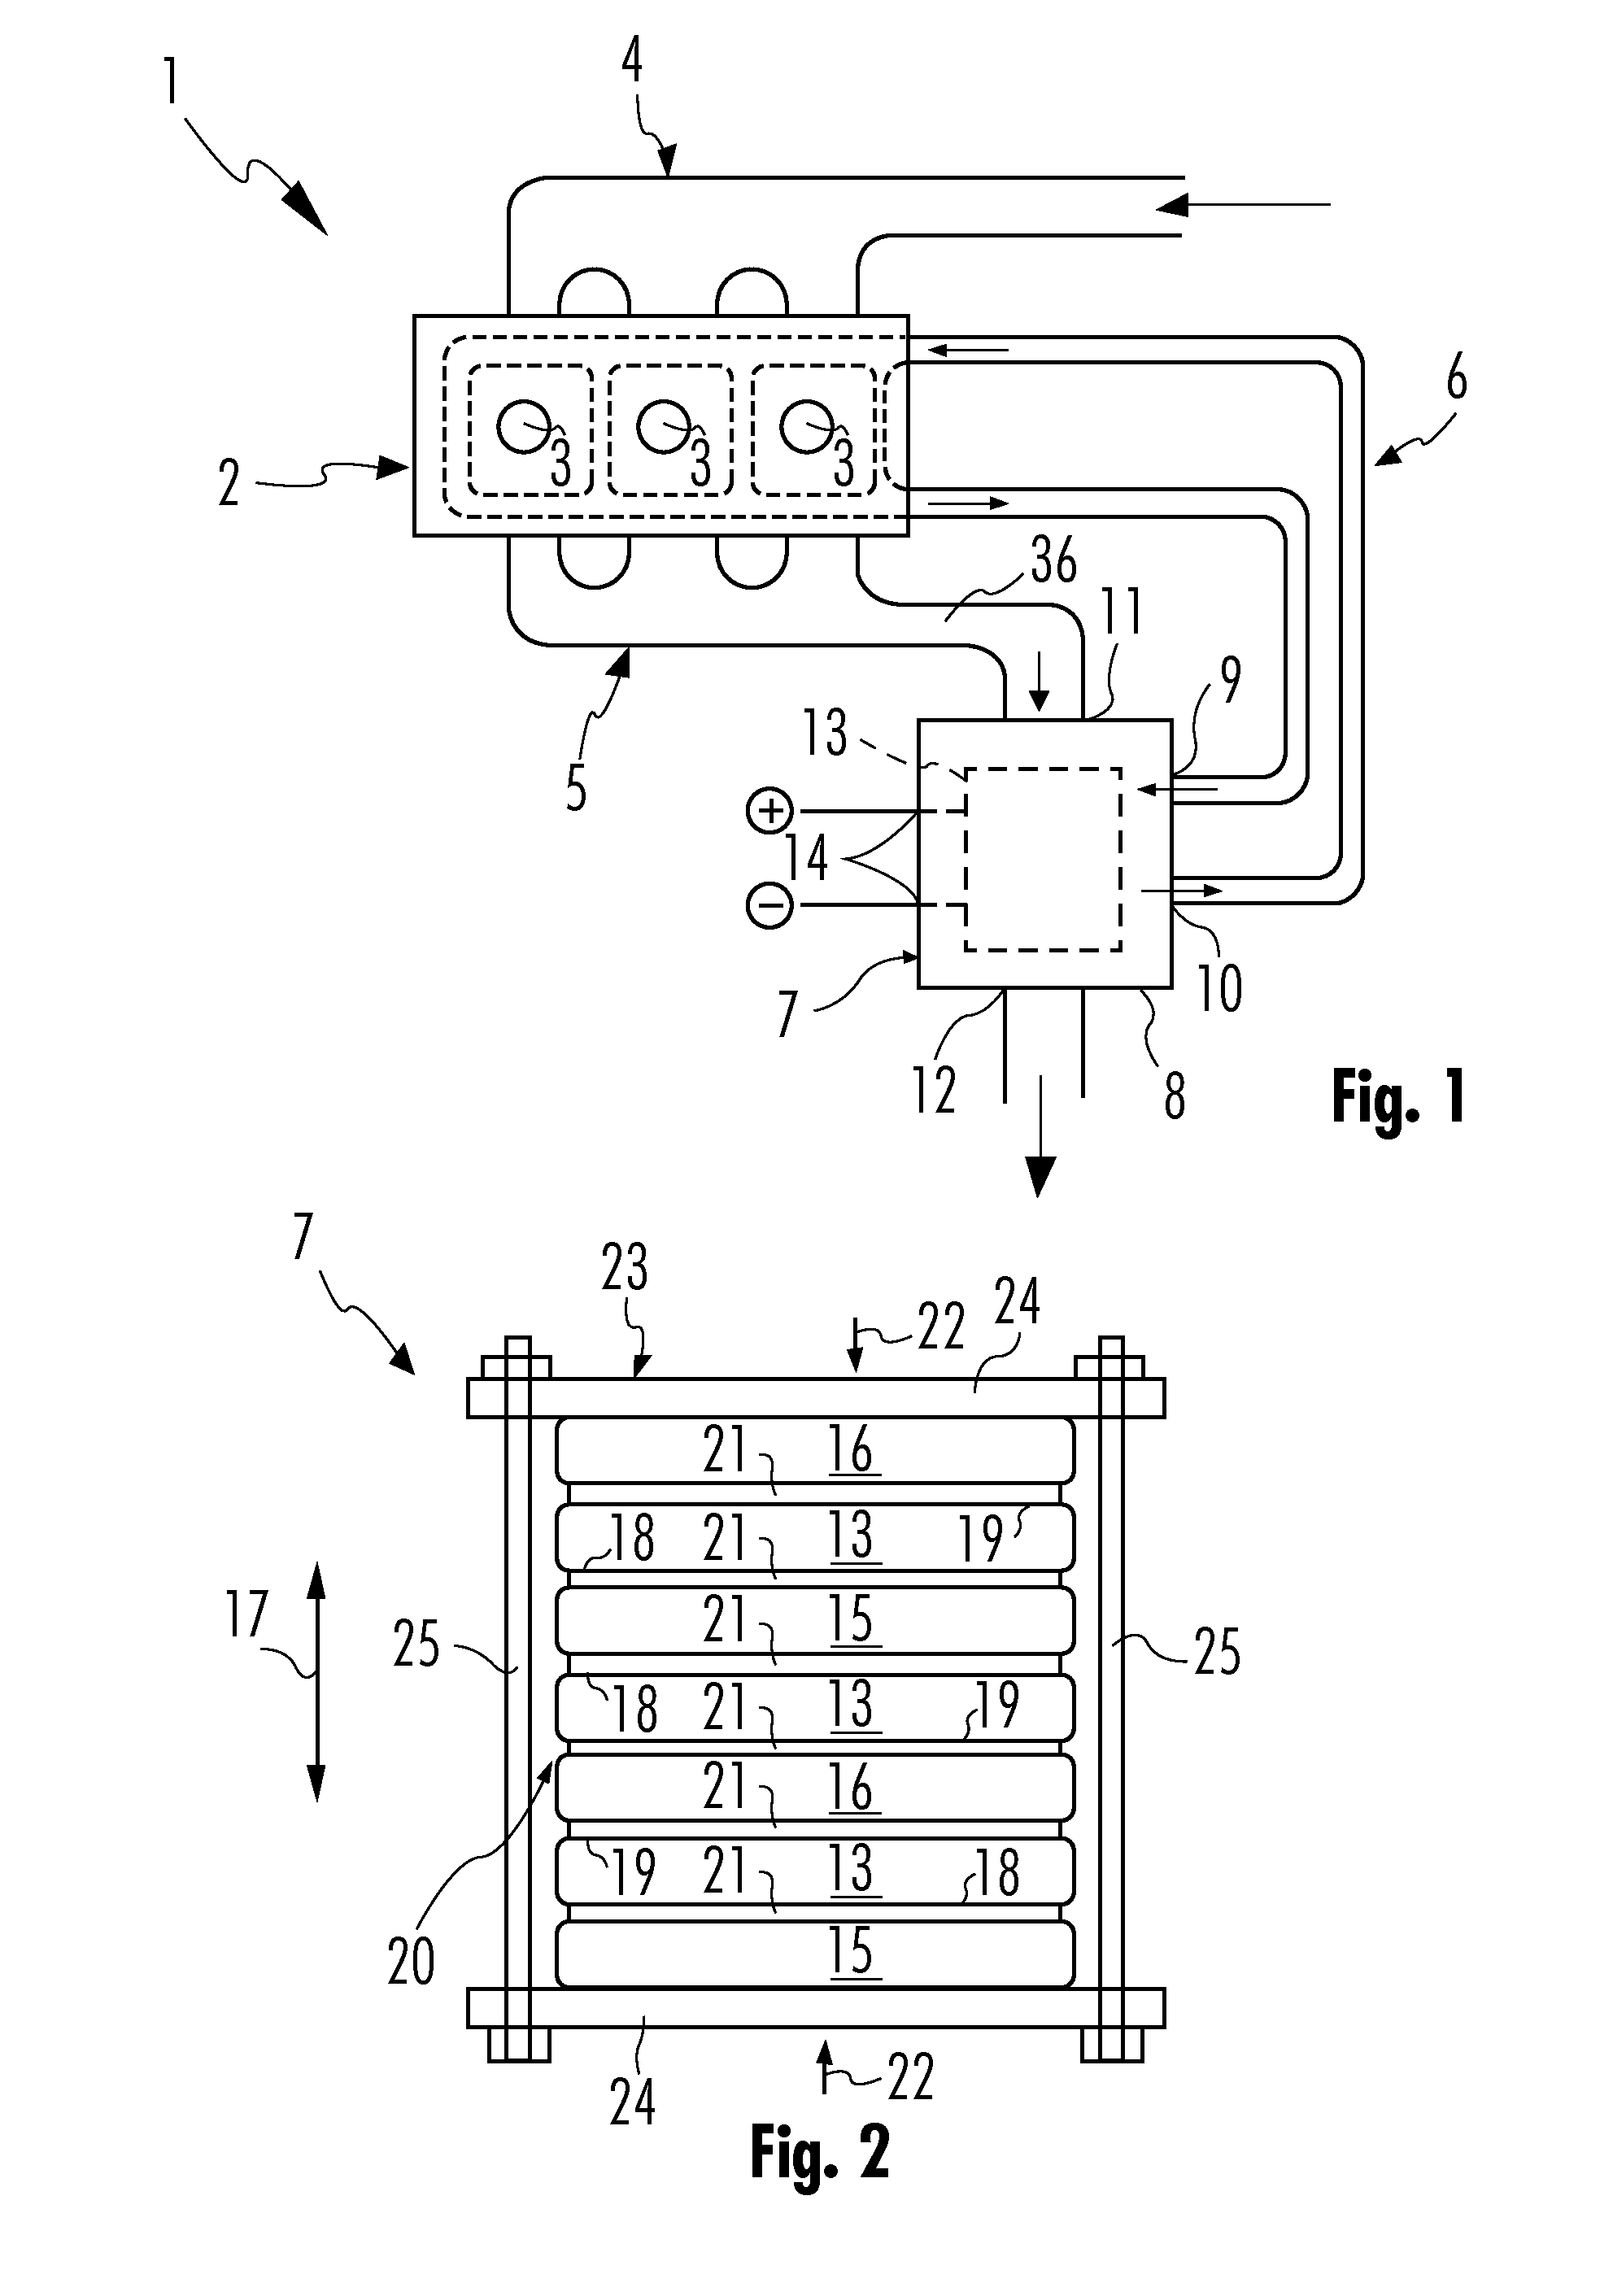 Thermoelectric module, heat exchanger, exhaust system and internal combustion engine